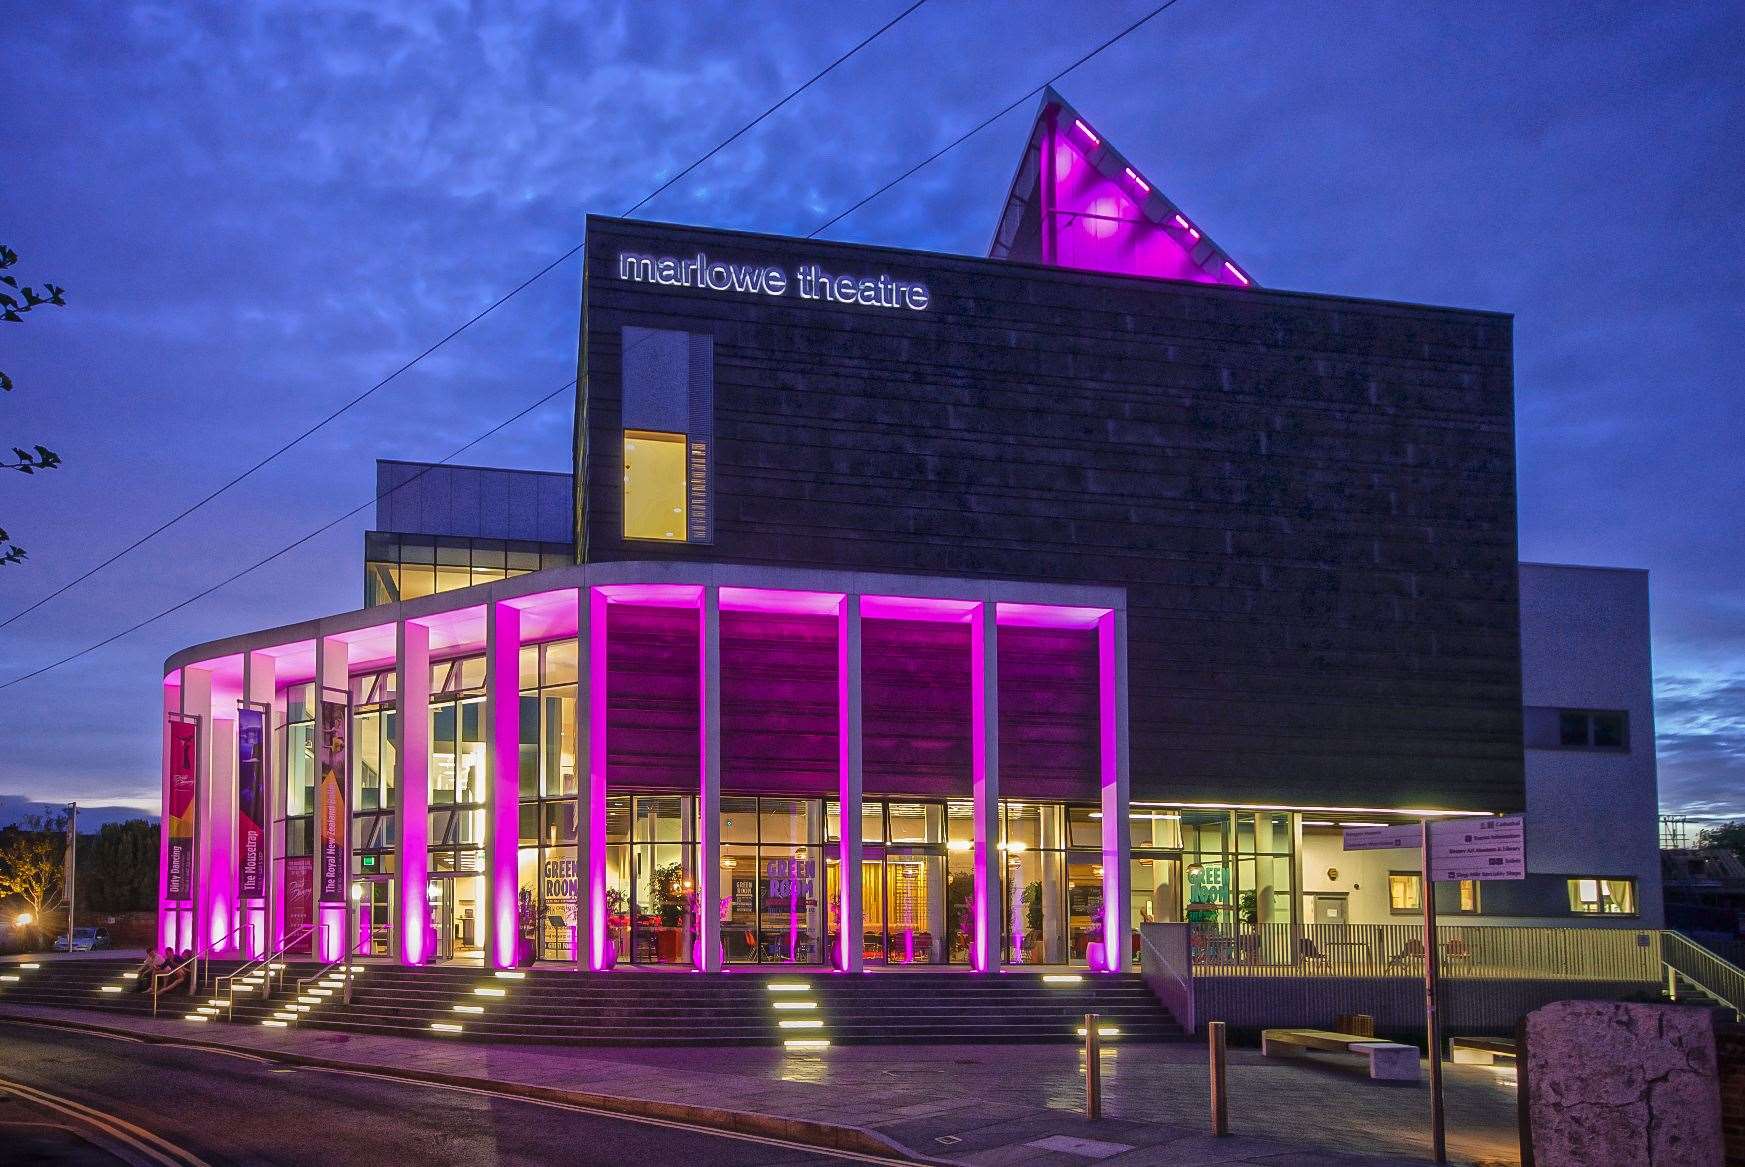 The Marlowe Theatre in Canterbury is named after Christopher, or Kit, Marlowe